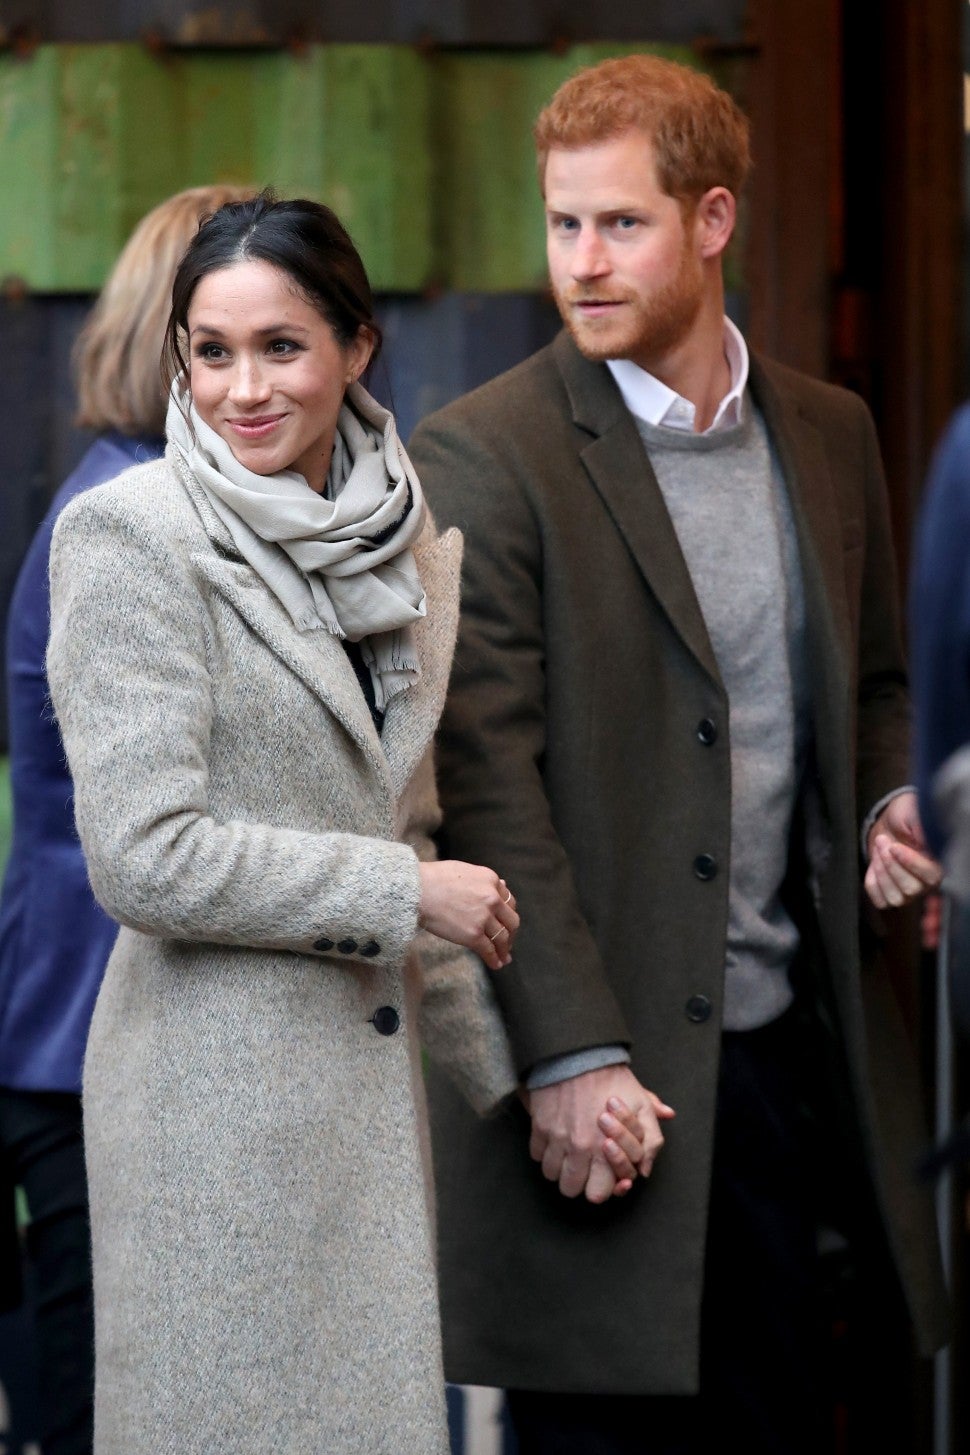 Meghan Markle and Prince Harry visit a radio station in London.